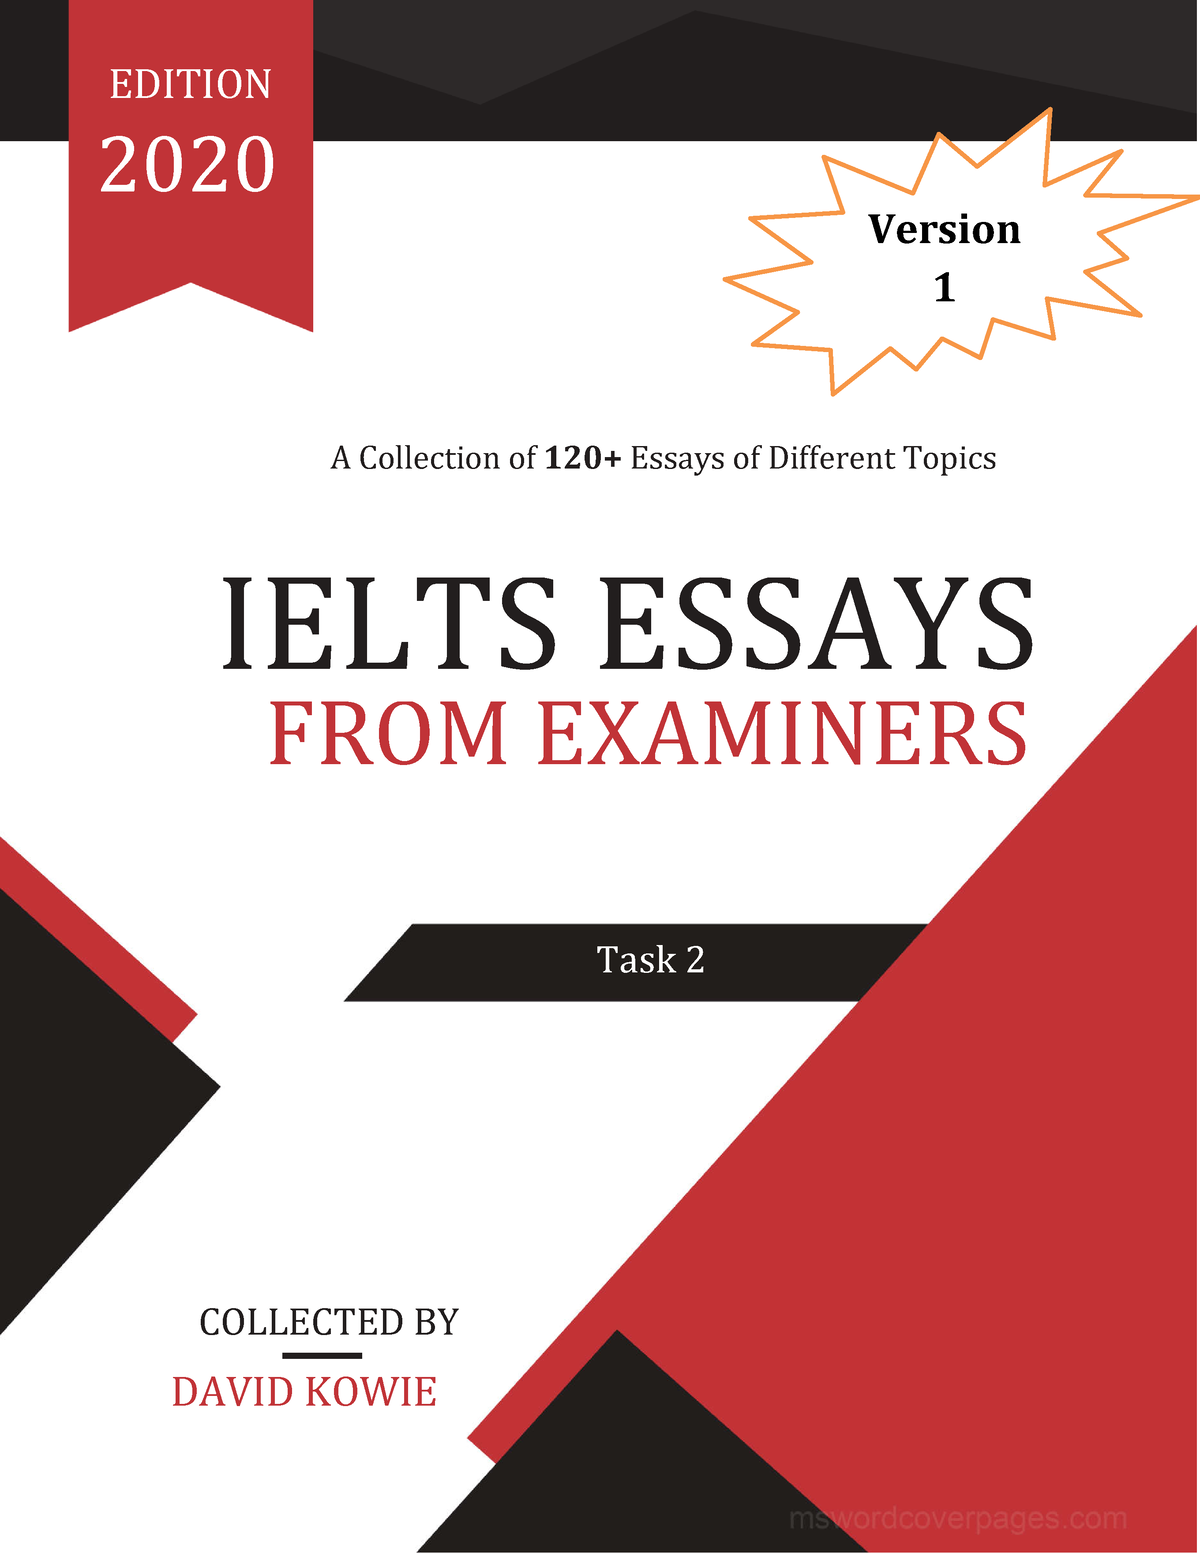 ielts essays written by examiners